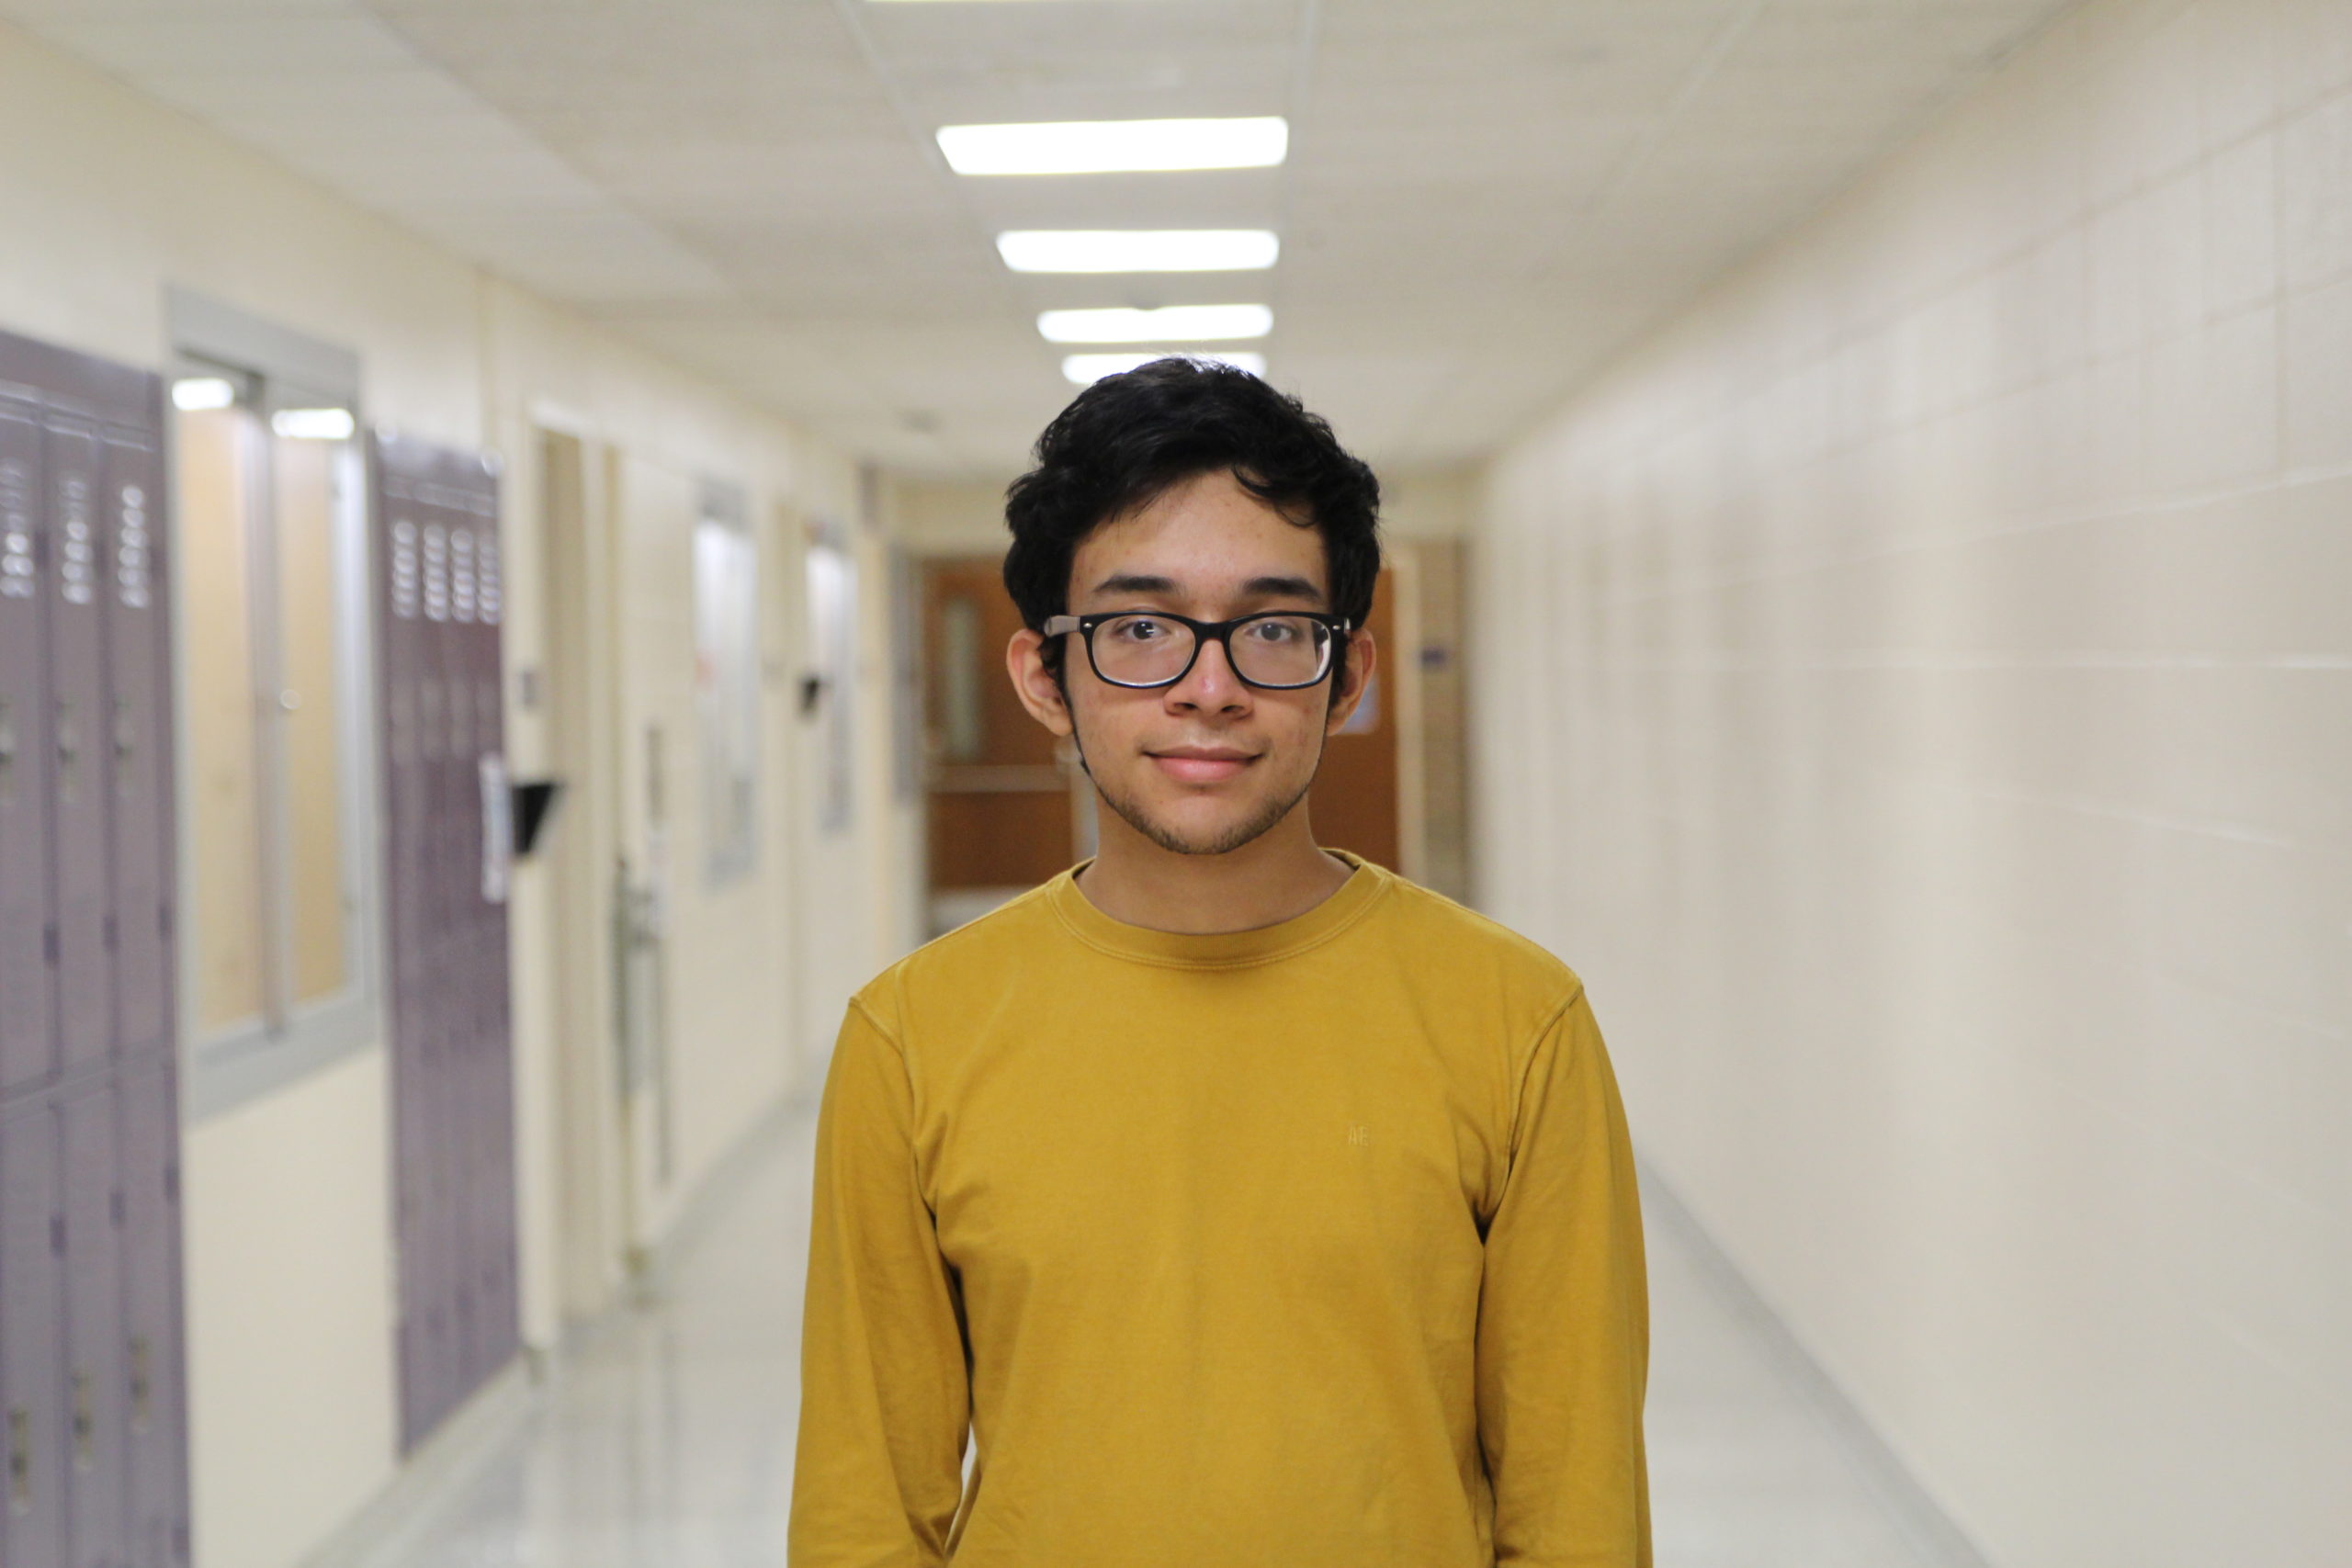 Hampton Bays High School senior Alexi Cruz Guzman was recently recognized by the Hampton Bays Board of Education for being named a National Hispanic Scholar by the College Board. Mr. Guzman earned the honor by scoring in the top 2.5% of all PSAT/NMSQT test takers in 2019. He was presented with a certificate of recognition. 